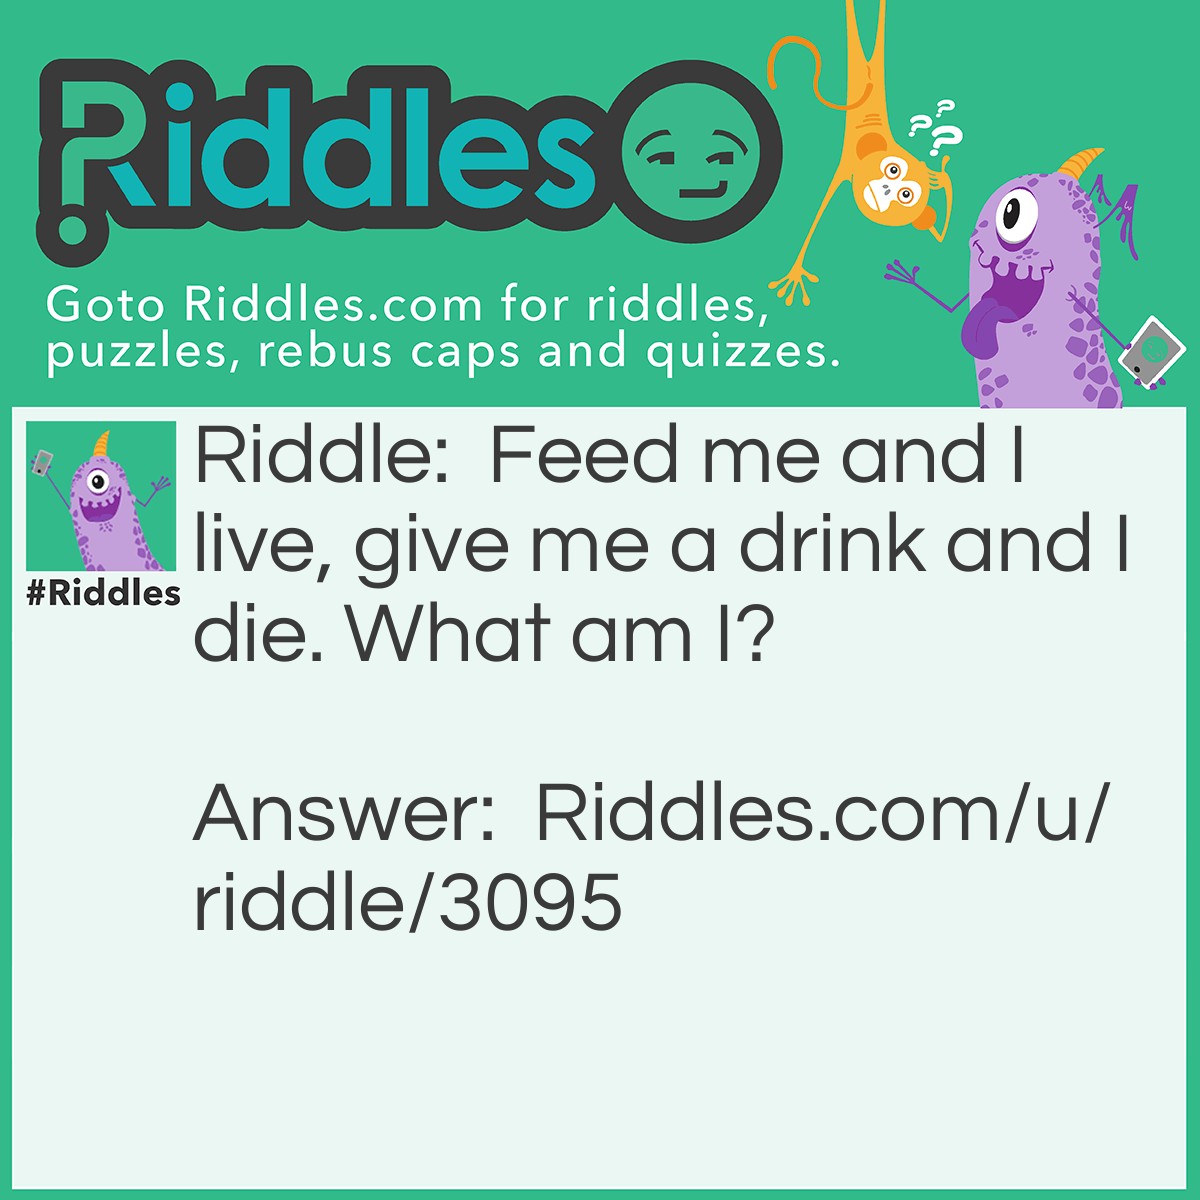 Riddle: Feed me and I live, give me a drink and I die. What am I? Answer: I am a Fire!